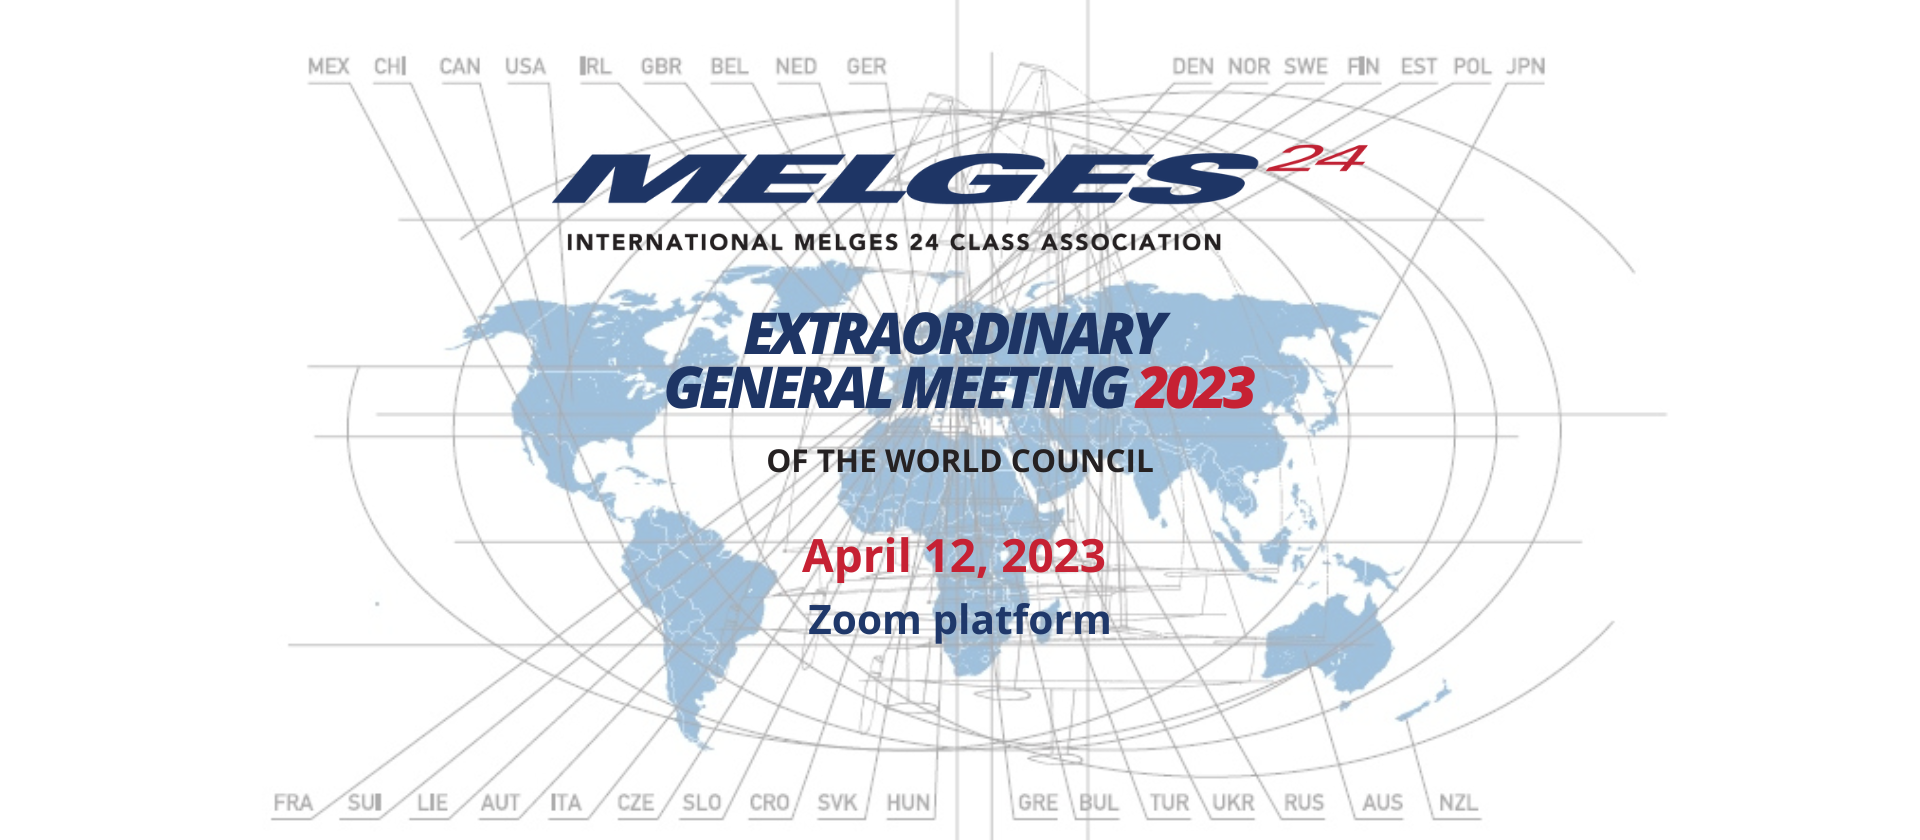 IM24CA Extraordinary General Meeting 2023 of the World Council